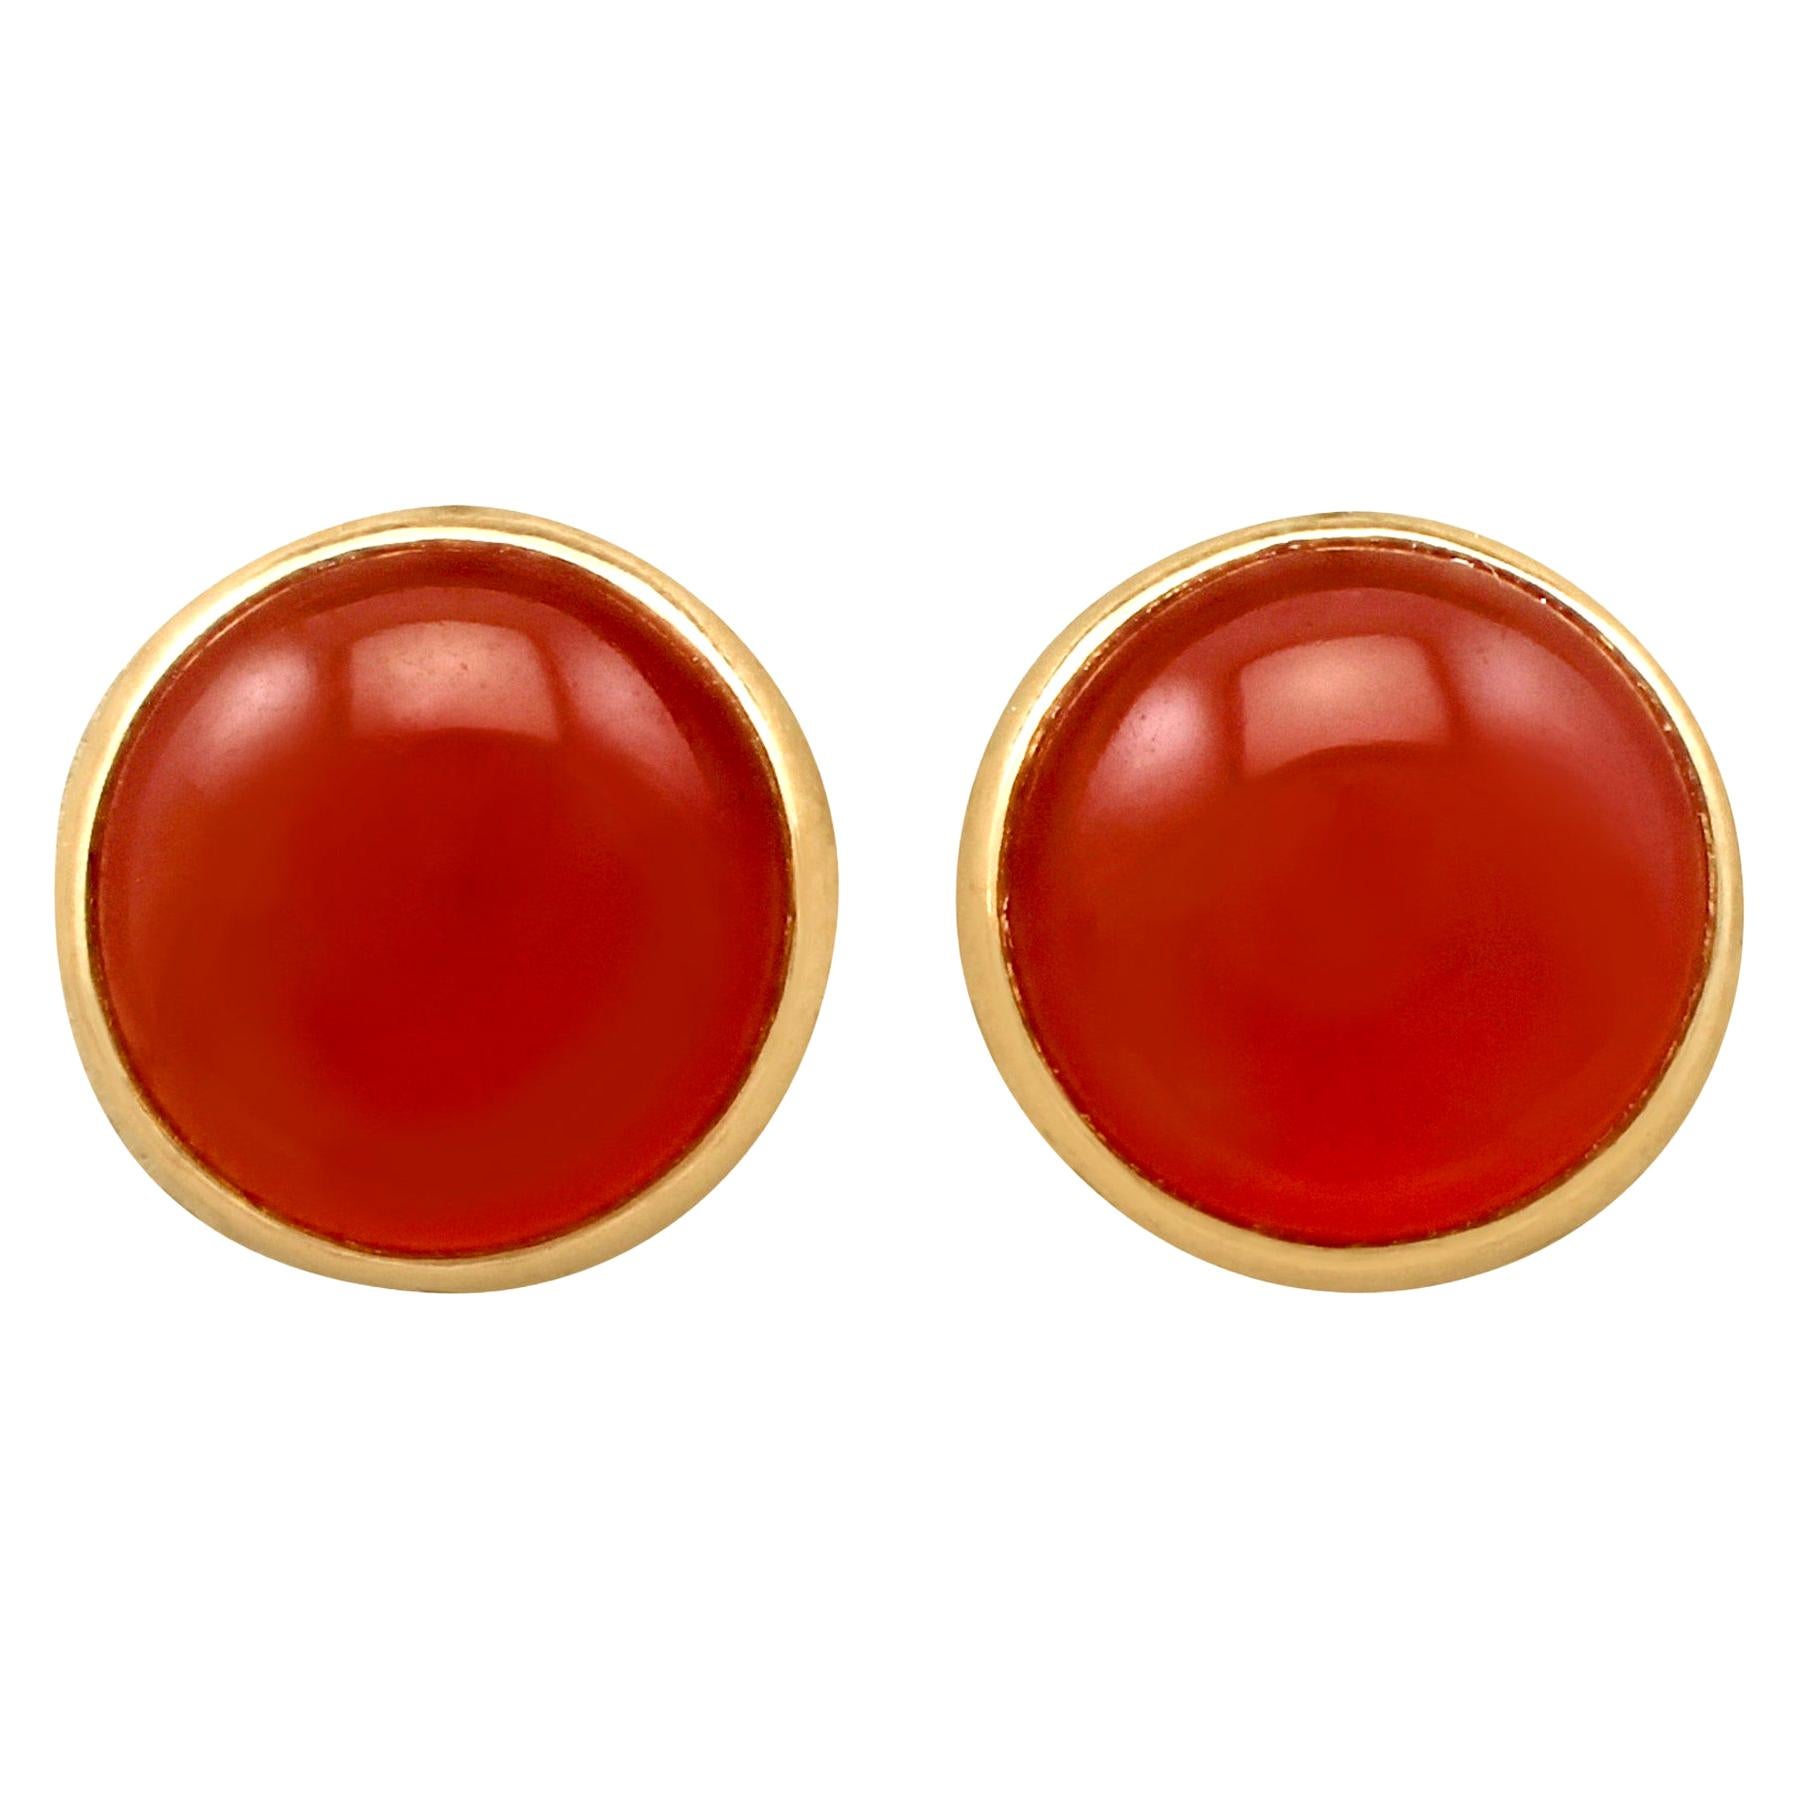 5.50 Carat Cabochon Cut Agate and Yellow Gold Stud Earrings